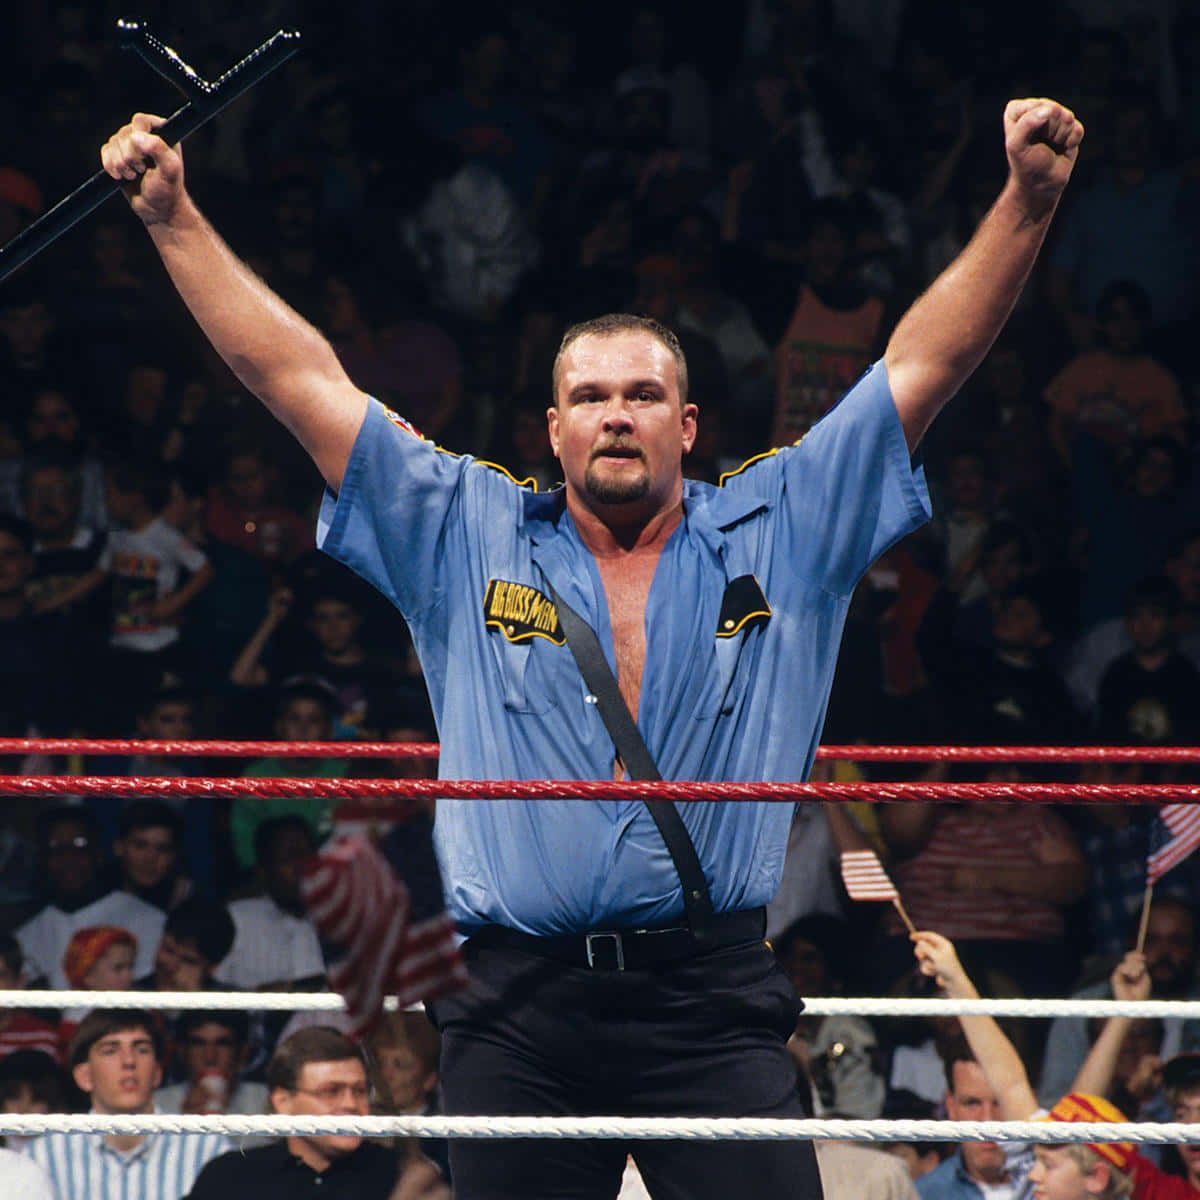 Big Boss Man Arms Up Picture